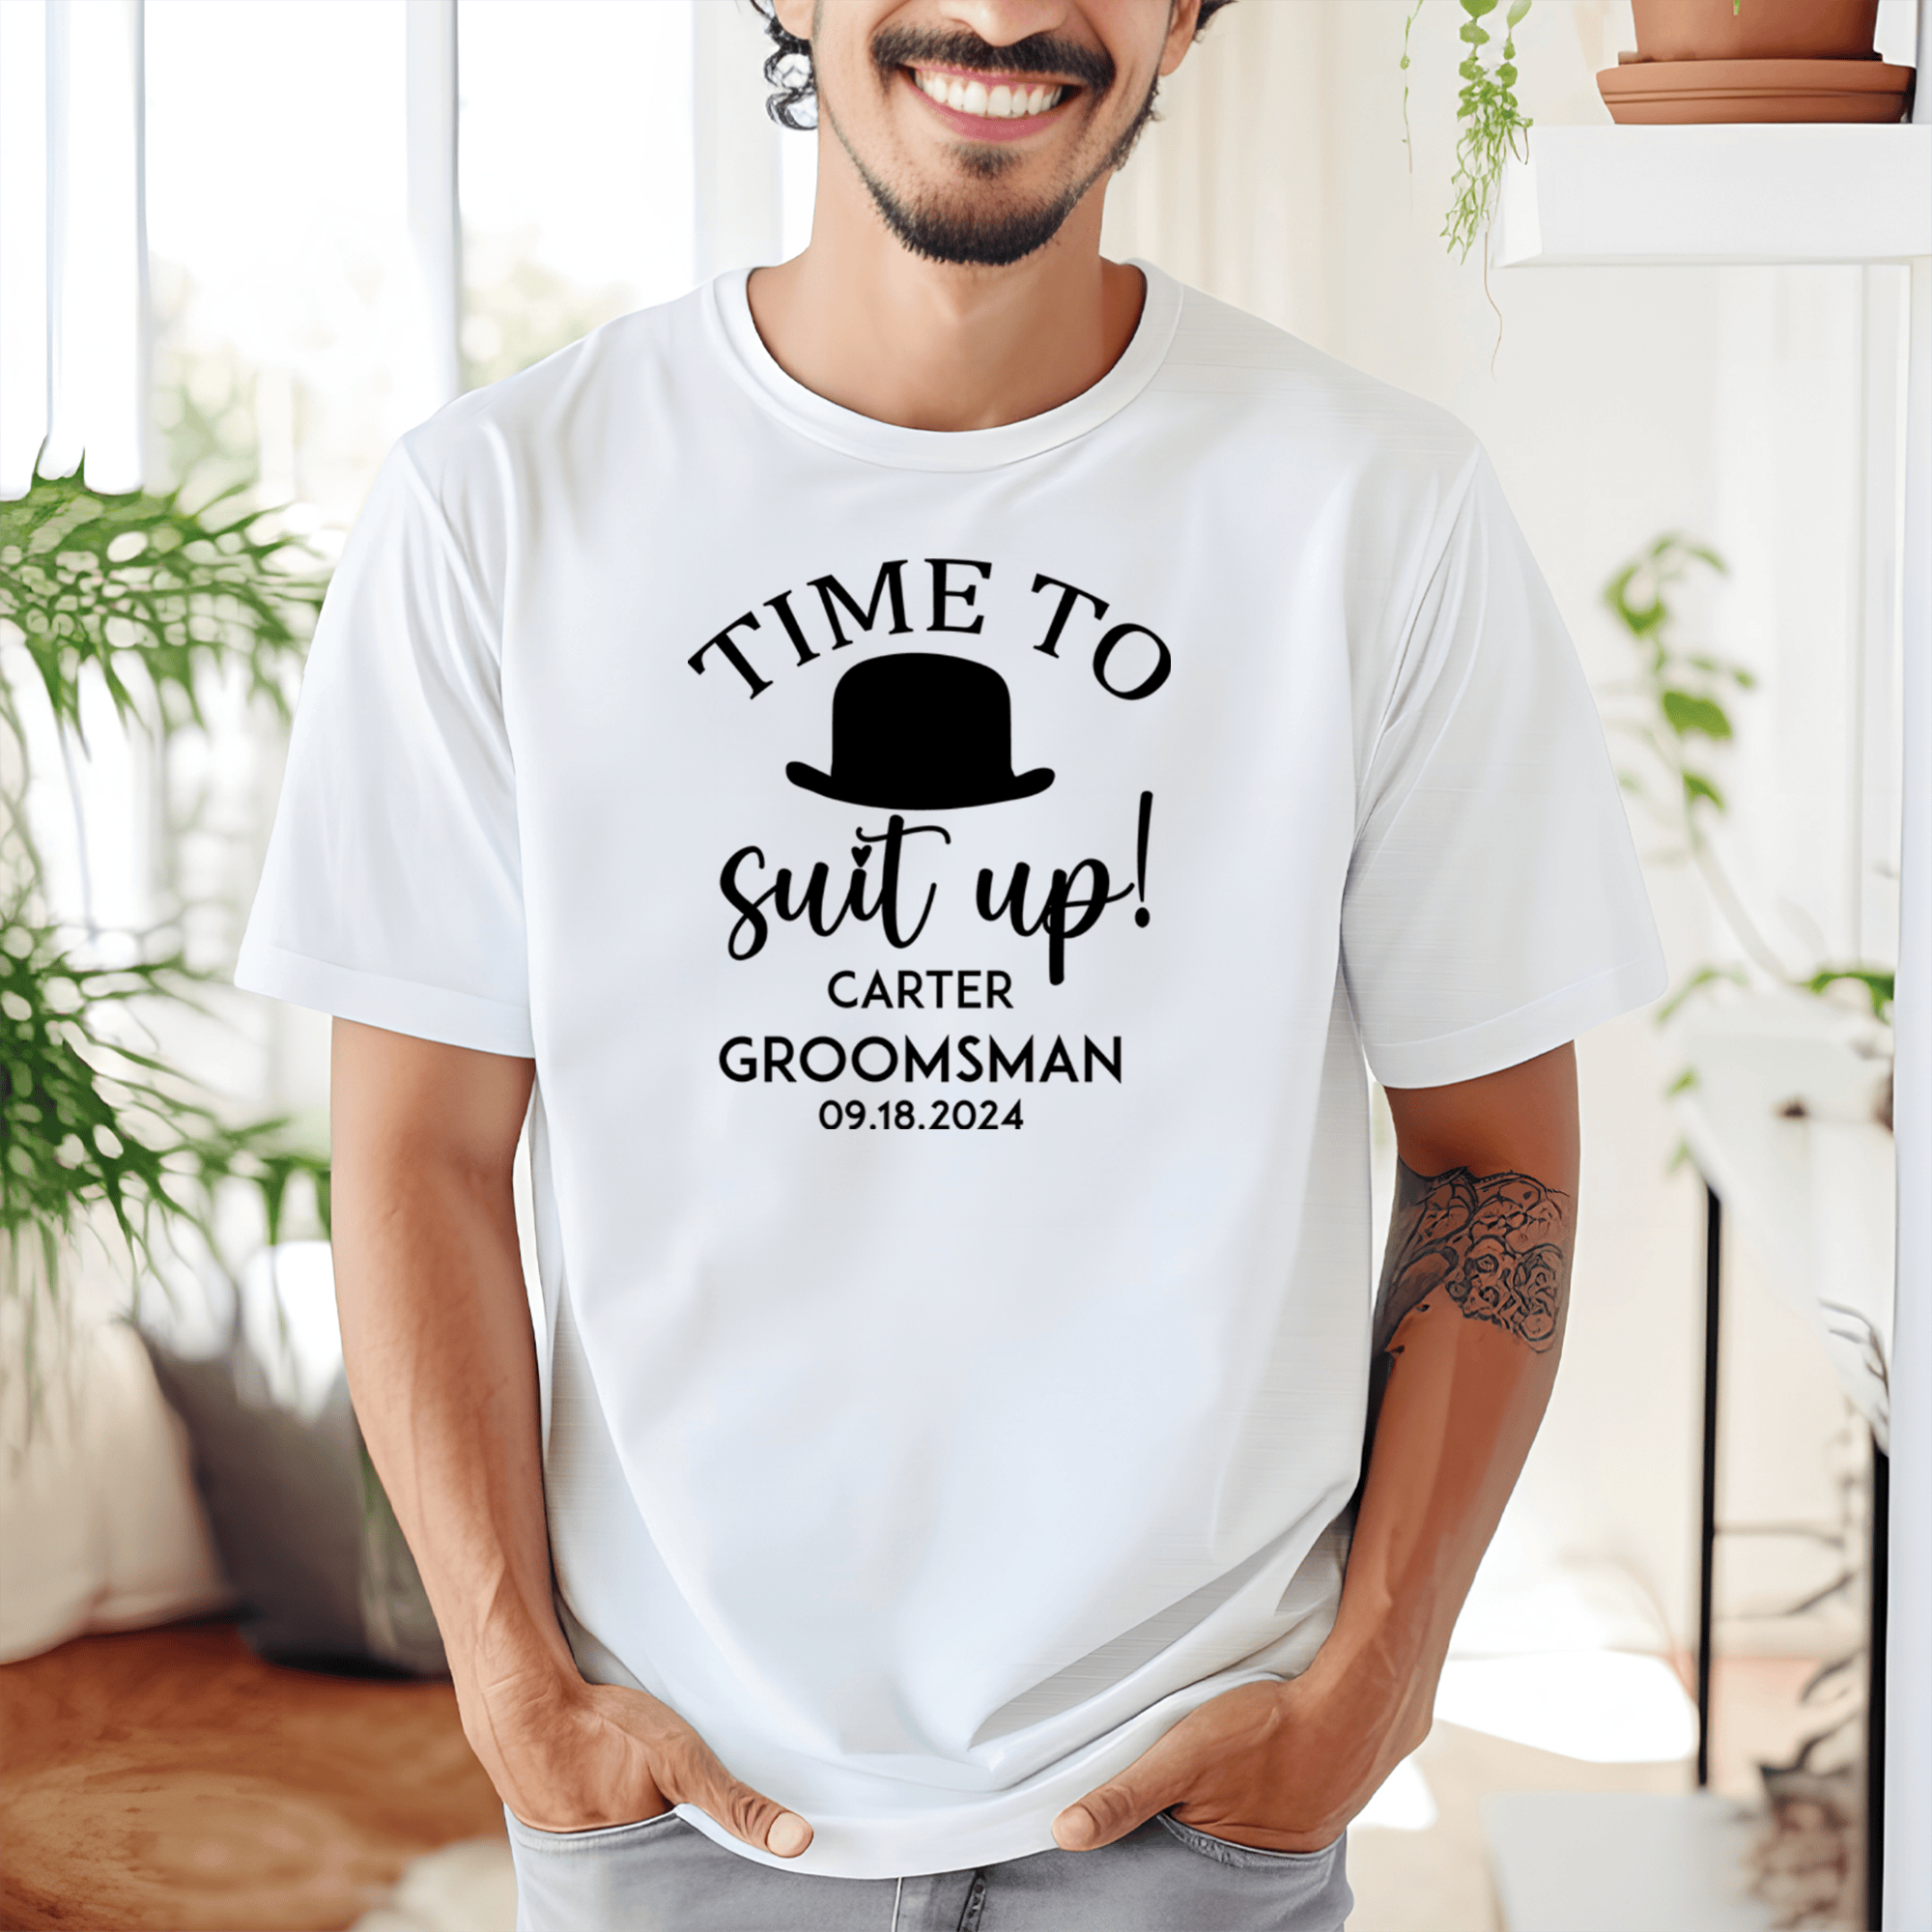 Grey Mens T-Shirt With Timeless Friend Design